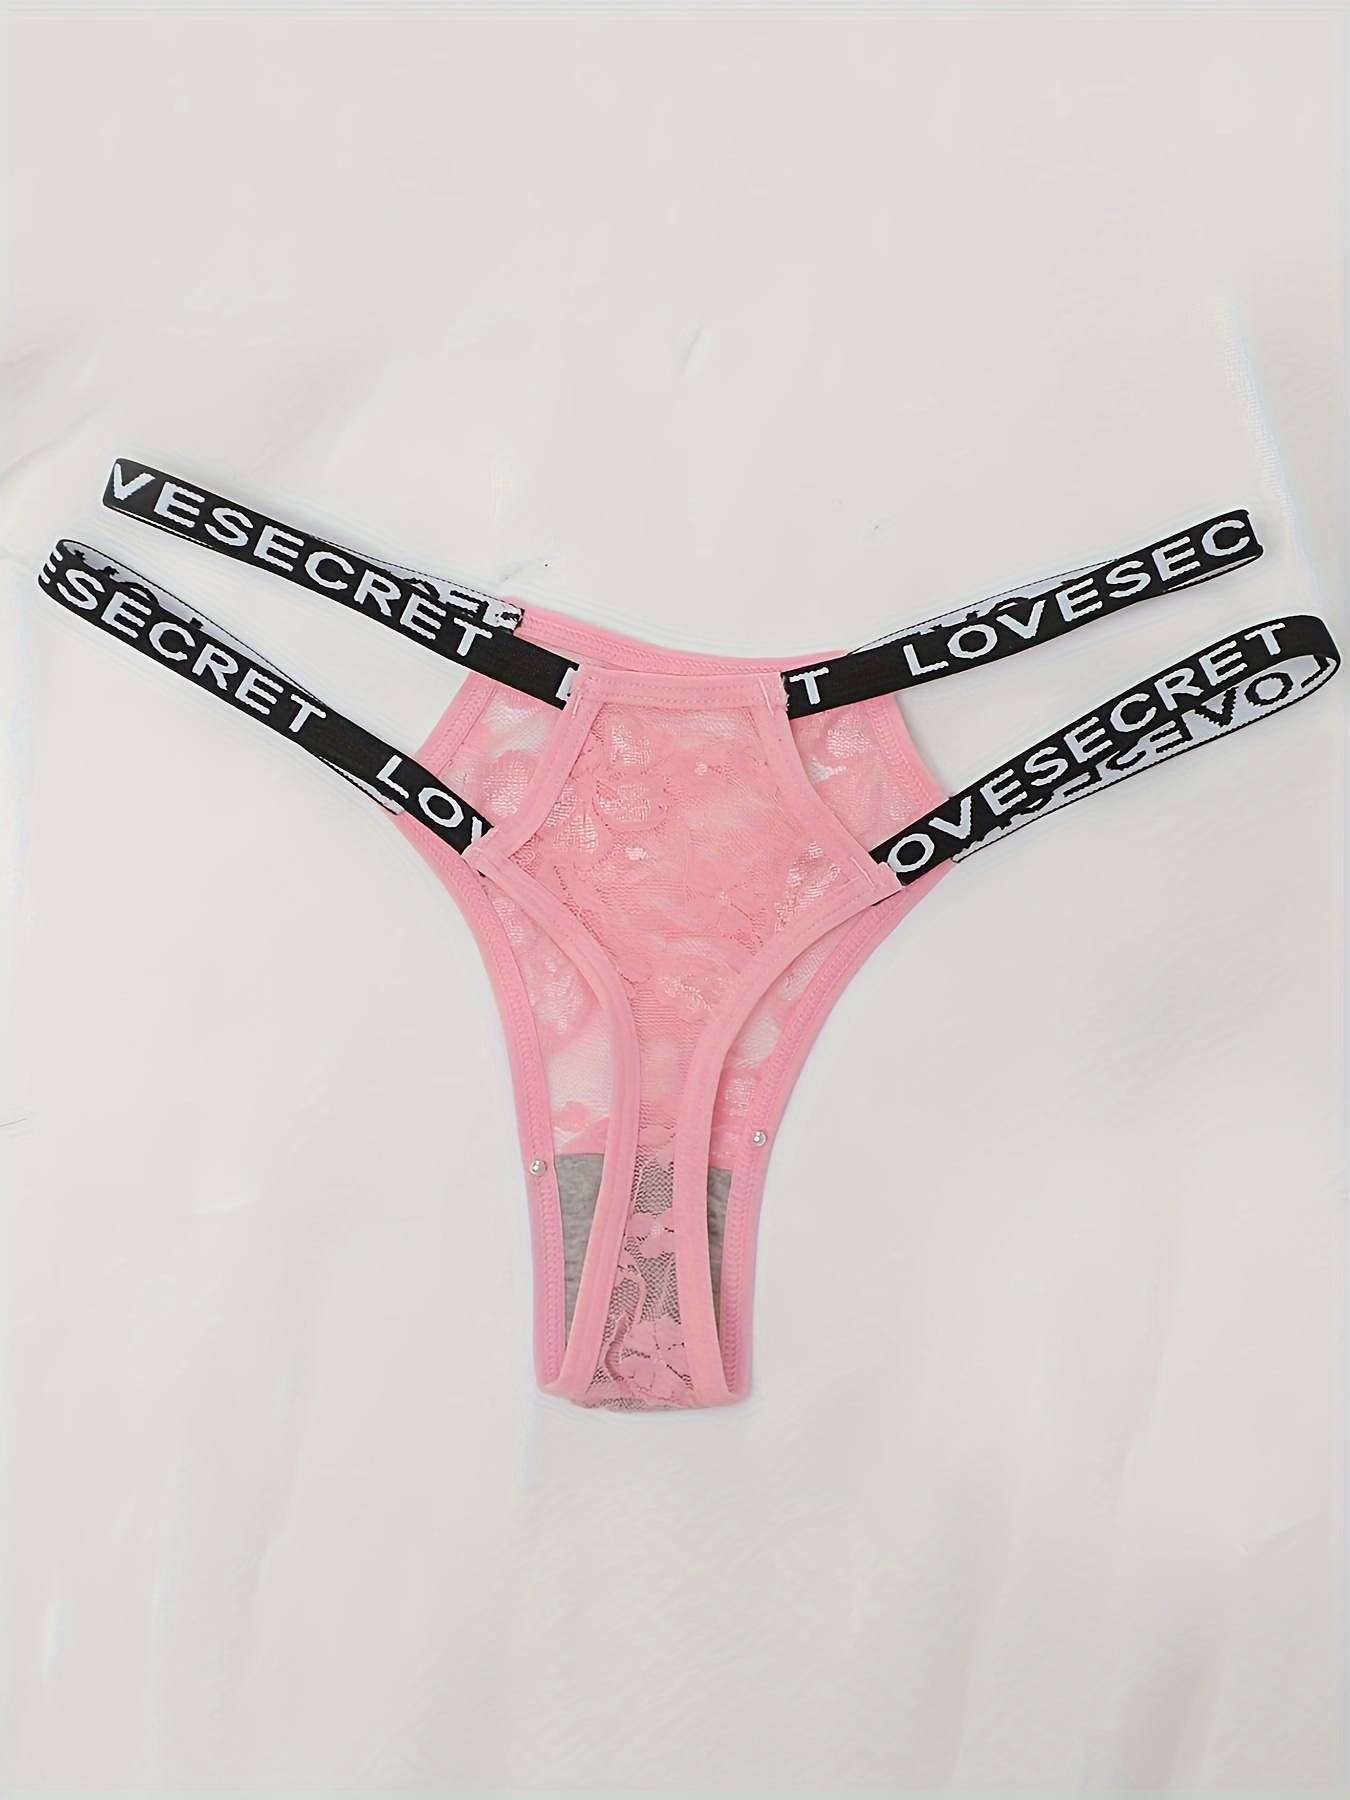  Victorias Secret Womens Lace Thong Underwear, Womens Panties,  Very Sexy Collection, Pink